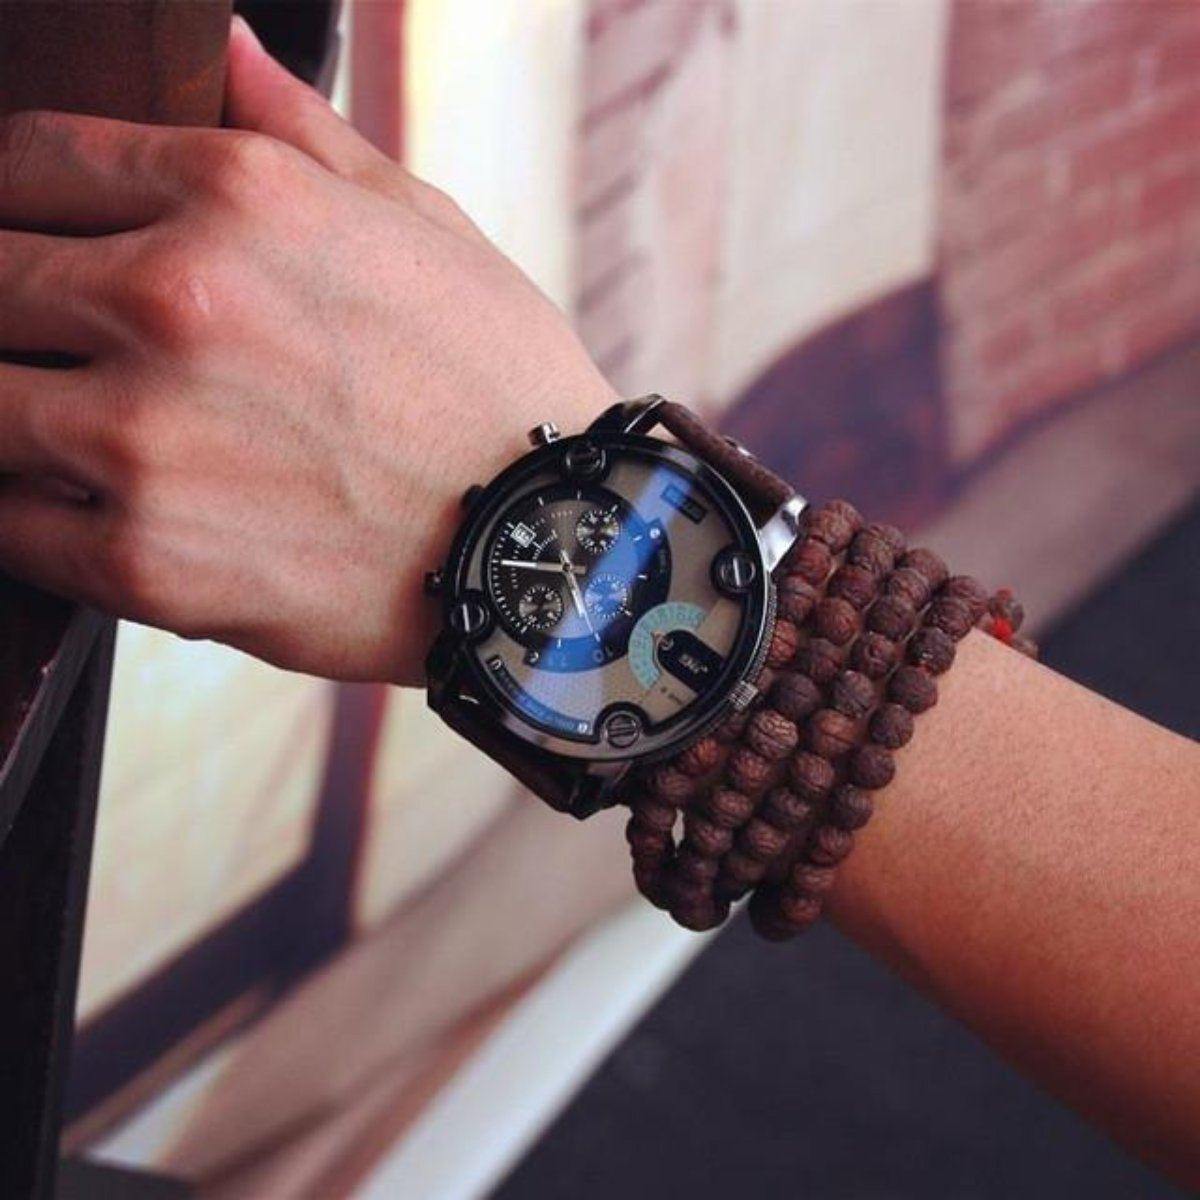 A woman's wrist with a Badass Transparent Watch, Stainless Steel Case, Leather Band on it.